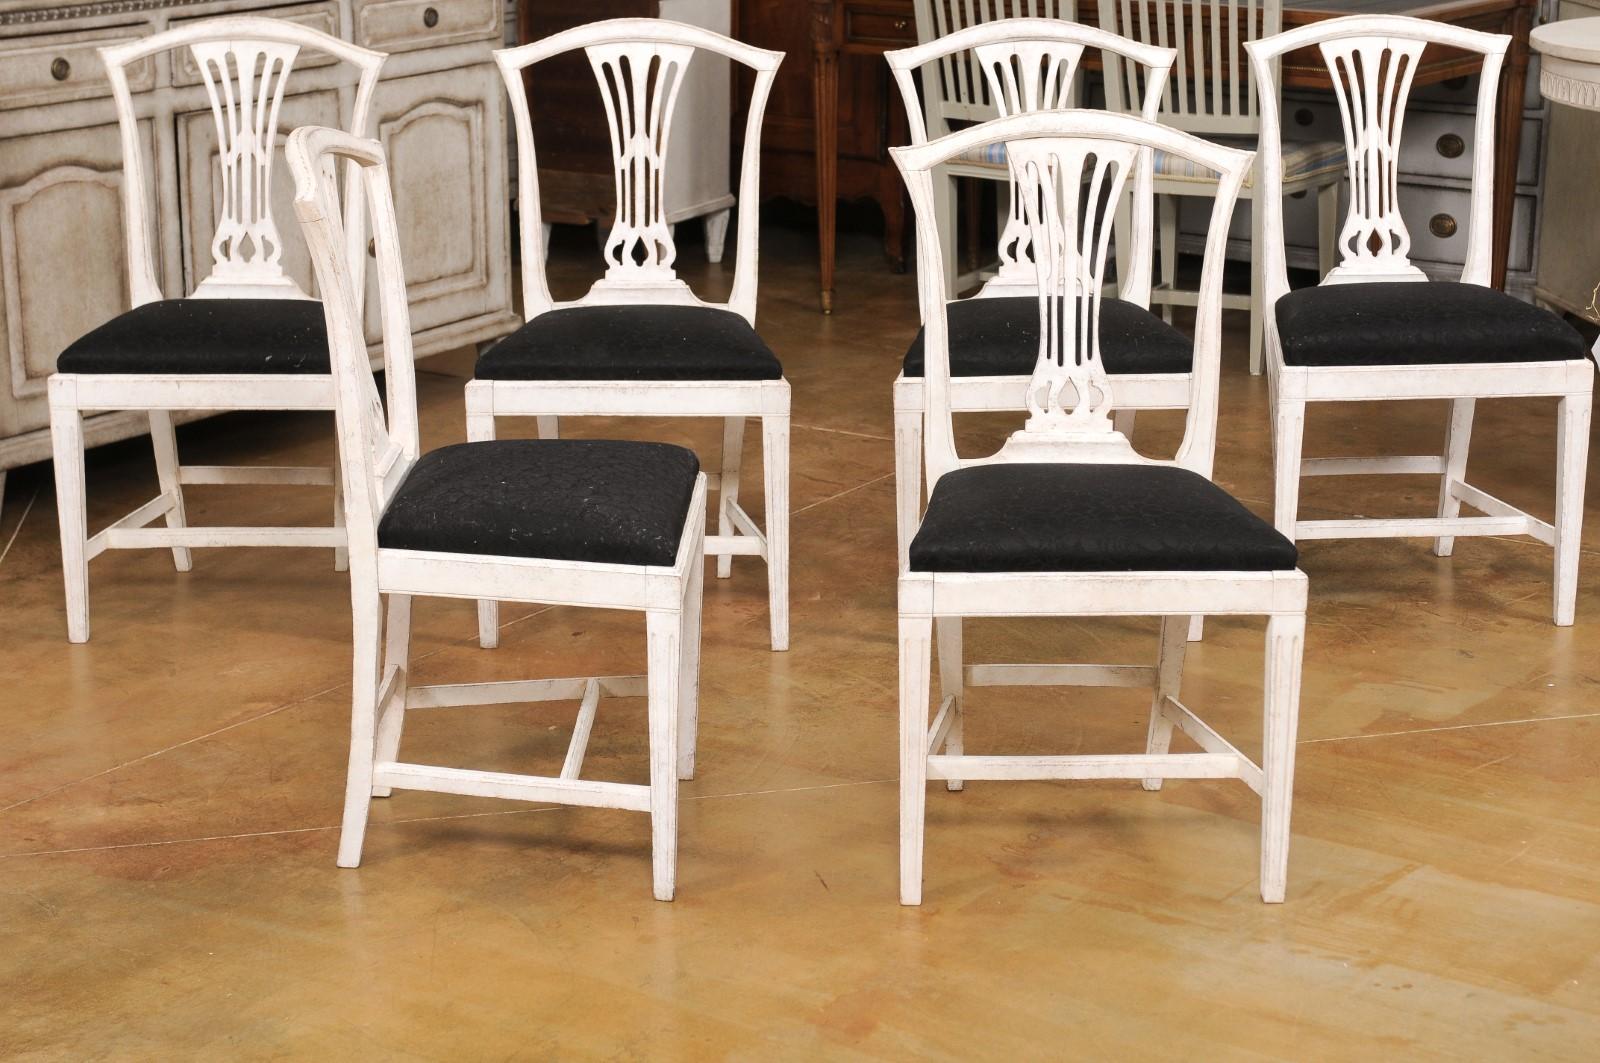 Upholstery Set of Six Swedish 1890s Painted Wood Dining Room Side Chairs with Black Fabric